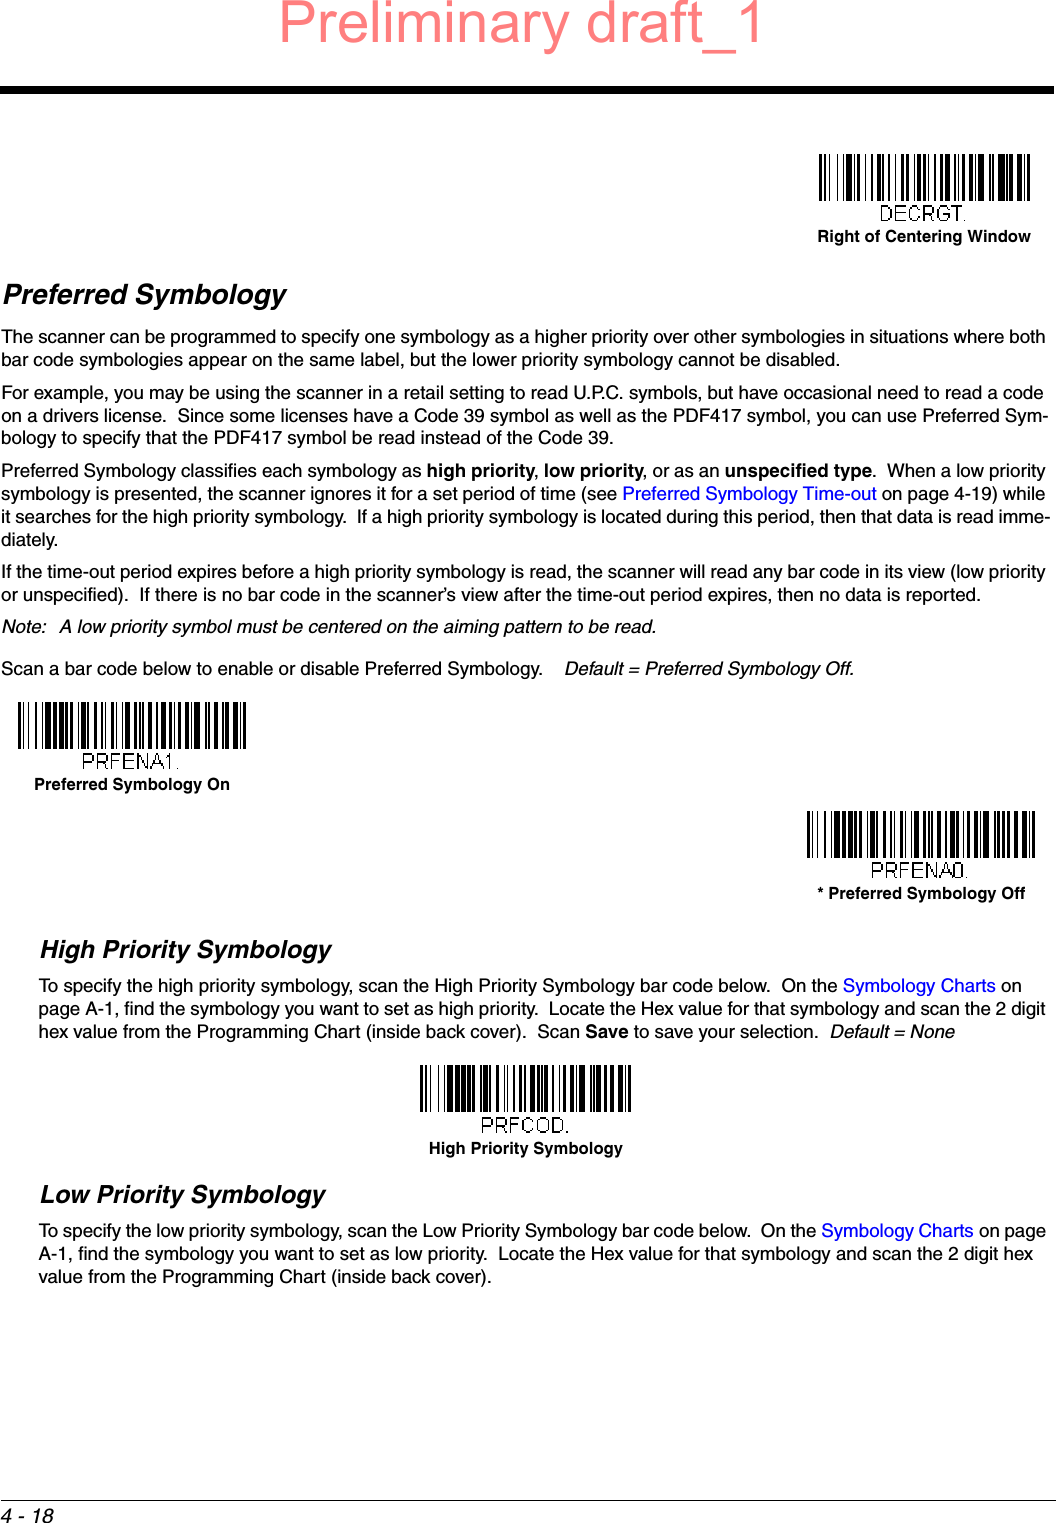 4 - 18Preferred SymbologyThe scanner can be programmed to specify one symbology as a higher priority over other symbologies in situations where both bar code symbologies appear on the same label, but the lower priority symbology cannot be disabled.For example, you may be using the scanner in a retail setting to read U.P.C. symbols, but have occasional need to read a code on a drivers license.  Since some licenses have a Code 39 symbol as well as the PDF417 symbol, you can use Preferred Sym-bology to specify that the PDF417 symbol be read instead of the Code 39.Preferred Symbology classifies each symbology as high priority, low priority, or as an unspecified type.  When a low priority symbology is presented, the scanner ignores it for a set period of time (see Preferred Symbology Time-out on page 4-19) while it searches for the high priority symbology.  If a high priority symbology is located during this period, then that data is read imme-diately. If the time-out period expires before a high priority symbology is read, the scanner will read any bar code in its view (low priority or unspecified).  If there is no bar code in the scanner’s view after the time-out period expires, then no data is reported.Note: A low priority symbol must be centered on the aiming pattern to be read.Scan a bar code below to enable or disable Preferred Symbology.    Default = Preferred Symbology Off.High Priority SymbologyTo specify the high priority symbology, scan the High Priority Symbology bar code below.  On the Symbology Charts on page A-1, find the symbology you want to set as high priority.  Locate the Hex value for that symbology and scan the 2 digit hex value from the Programming Chart (inside back cover).  Scan Save to save your selection.  Default = NoneLow Priority SymbologyTo specify the low priority symbology, scan the Low Priority Symbology bar code below.  On the Symbology Charts on page A-1, find the symbology you want to set as low priority.  Locate the Hex value for that symbology and scan the 2 digit hex value from the Programming Chart (inside back cover).  Right of Centering WindowPreferred Symbology On* Preferred Symbology OffHigh Priority SymbologyPreliminary draft_1